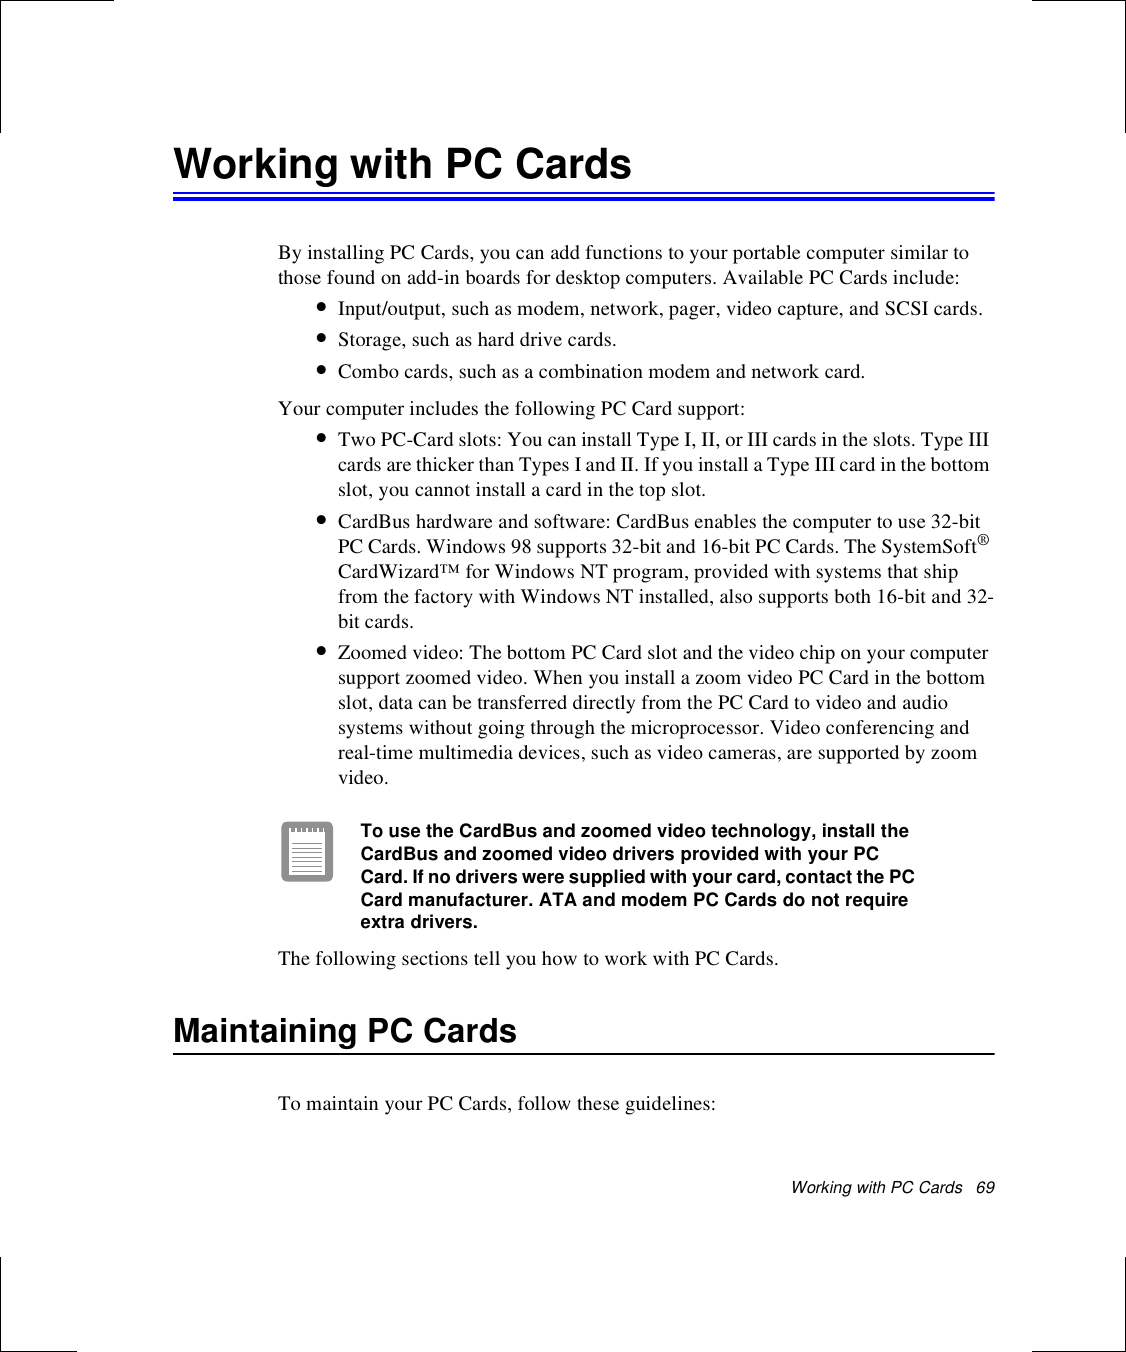 Working with PC Cards   69Working with PC CardsBy installing PC Cards, you can add functions to your portable computer similar to those found on add-in boards for desktop computers. Available PC Cards include:•Input/output, such as modem, network, pager, video capture, and SCSI cards.•Storage, such as hard drive cards.•Combo cards, such as a combination modem and network card.Your computer includes the following PC Card support:•Two PC-Card slots: You can install Type I, II, or III cards in the slots. Type III cards are thicker than Types I and II. If you install a Type III card in the bottom slot, you cannot install a card in the top slot.•CardBus hardware and software: CardBus enables the computer to use 32-bit PC Cards. Windows 98 supports 32-bit and 16-bit PC Cards. The SystemSoft® CardWizard™ for Windows NT program, provided with systems that ship from the factory with Windows NT installed, also supports both 16-bit and 32-bit cards.•Zoomed video: The bottom PC Card slot and the video chip on your computer support zoomed video. When you install a zoom video PC Card in the bottom slot, data can be transferred directly from the PC Card to video and audio systems without going through the microprocessor. Video conferencing and real-time multimedia devices, such as video cameras, are supported by zoom video.To use the CardBus and zoomed video technology, install the CardBus and zoomed video drivers provided with your PC Card. If no drivers were supplied with your card, contact the PC Card manufacturer. ATA and modem PC Cards do not require extra drivers.The following sections tell you how to work with PC Cards. Maintaining PC CardsTo maintain your PC Cards, follow these guidelines: